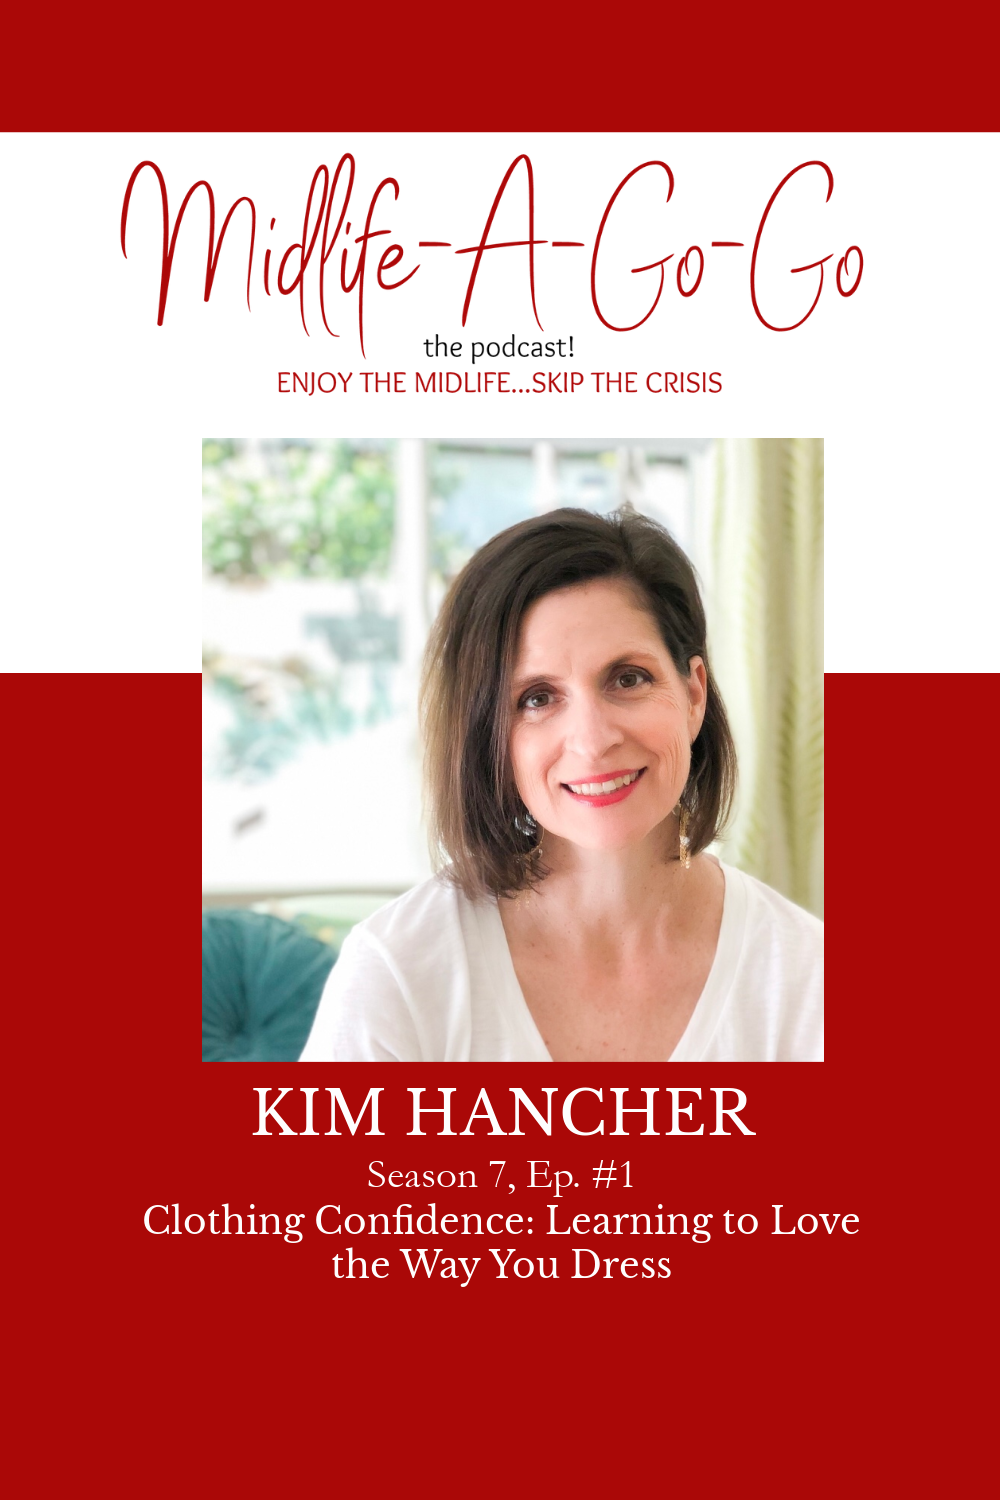 Clothing Confidence: Learning to Love the Way You Dress with Kim Hancher